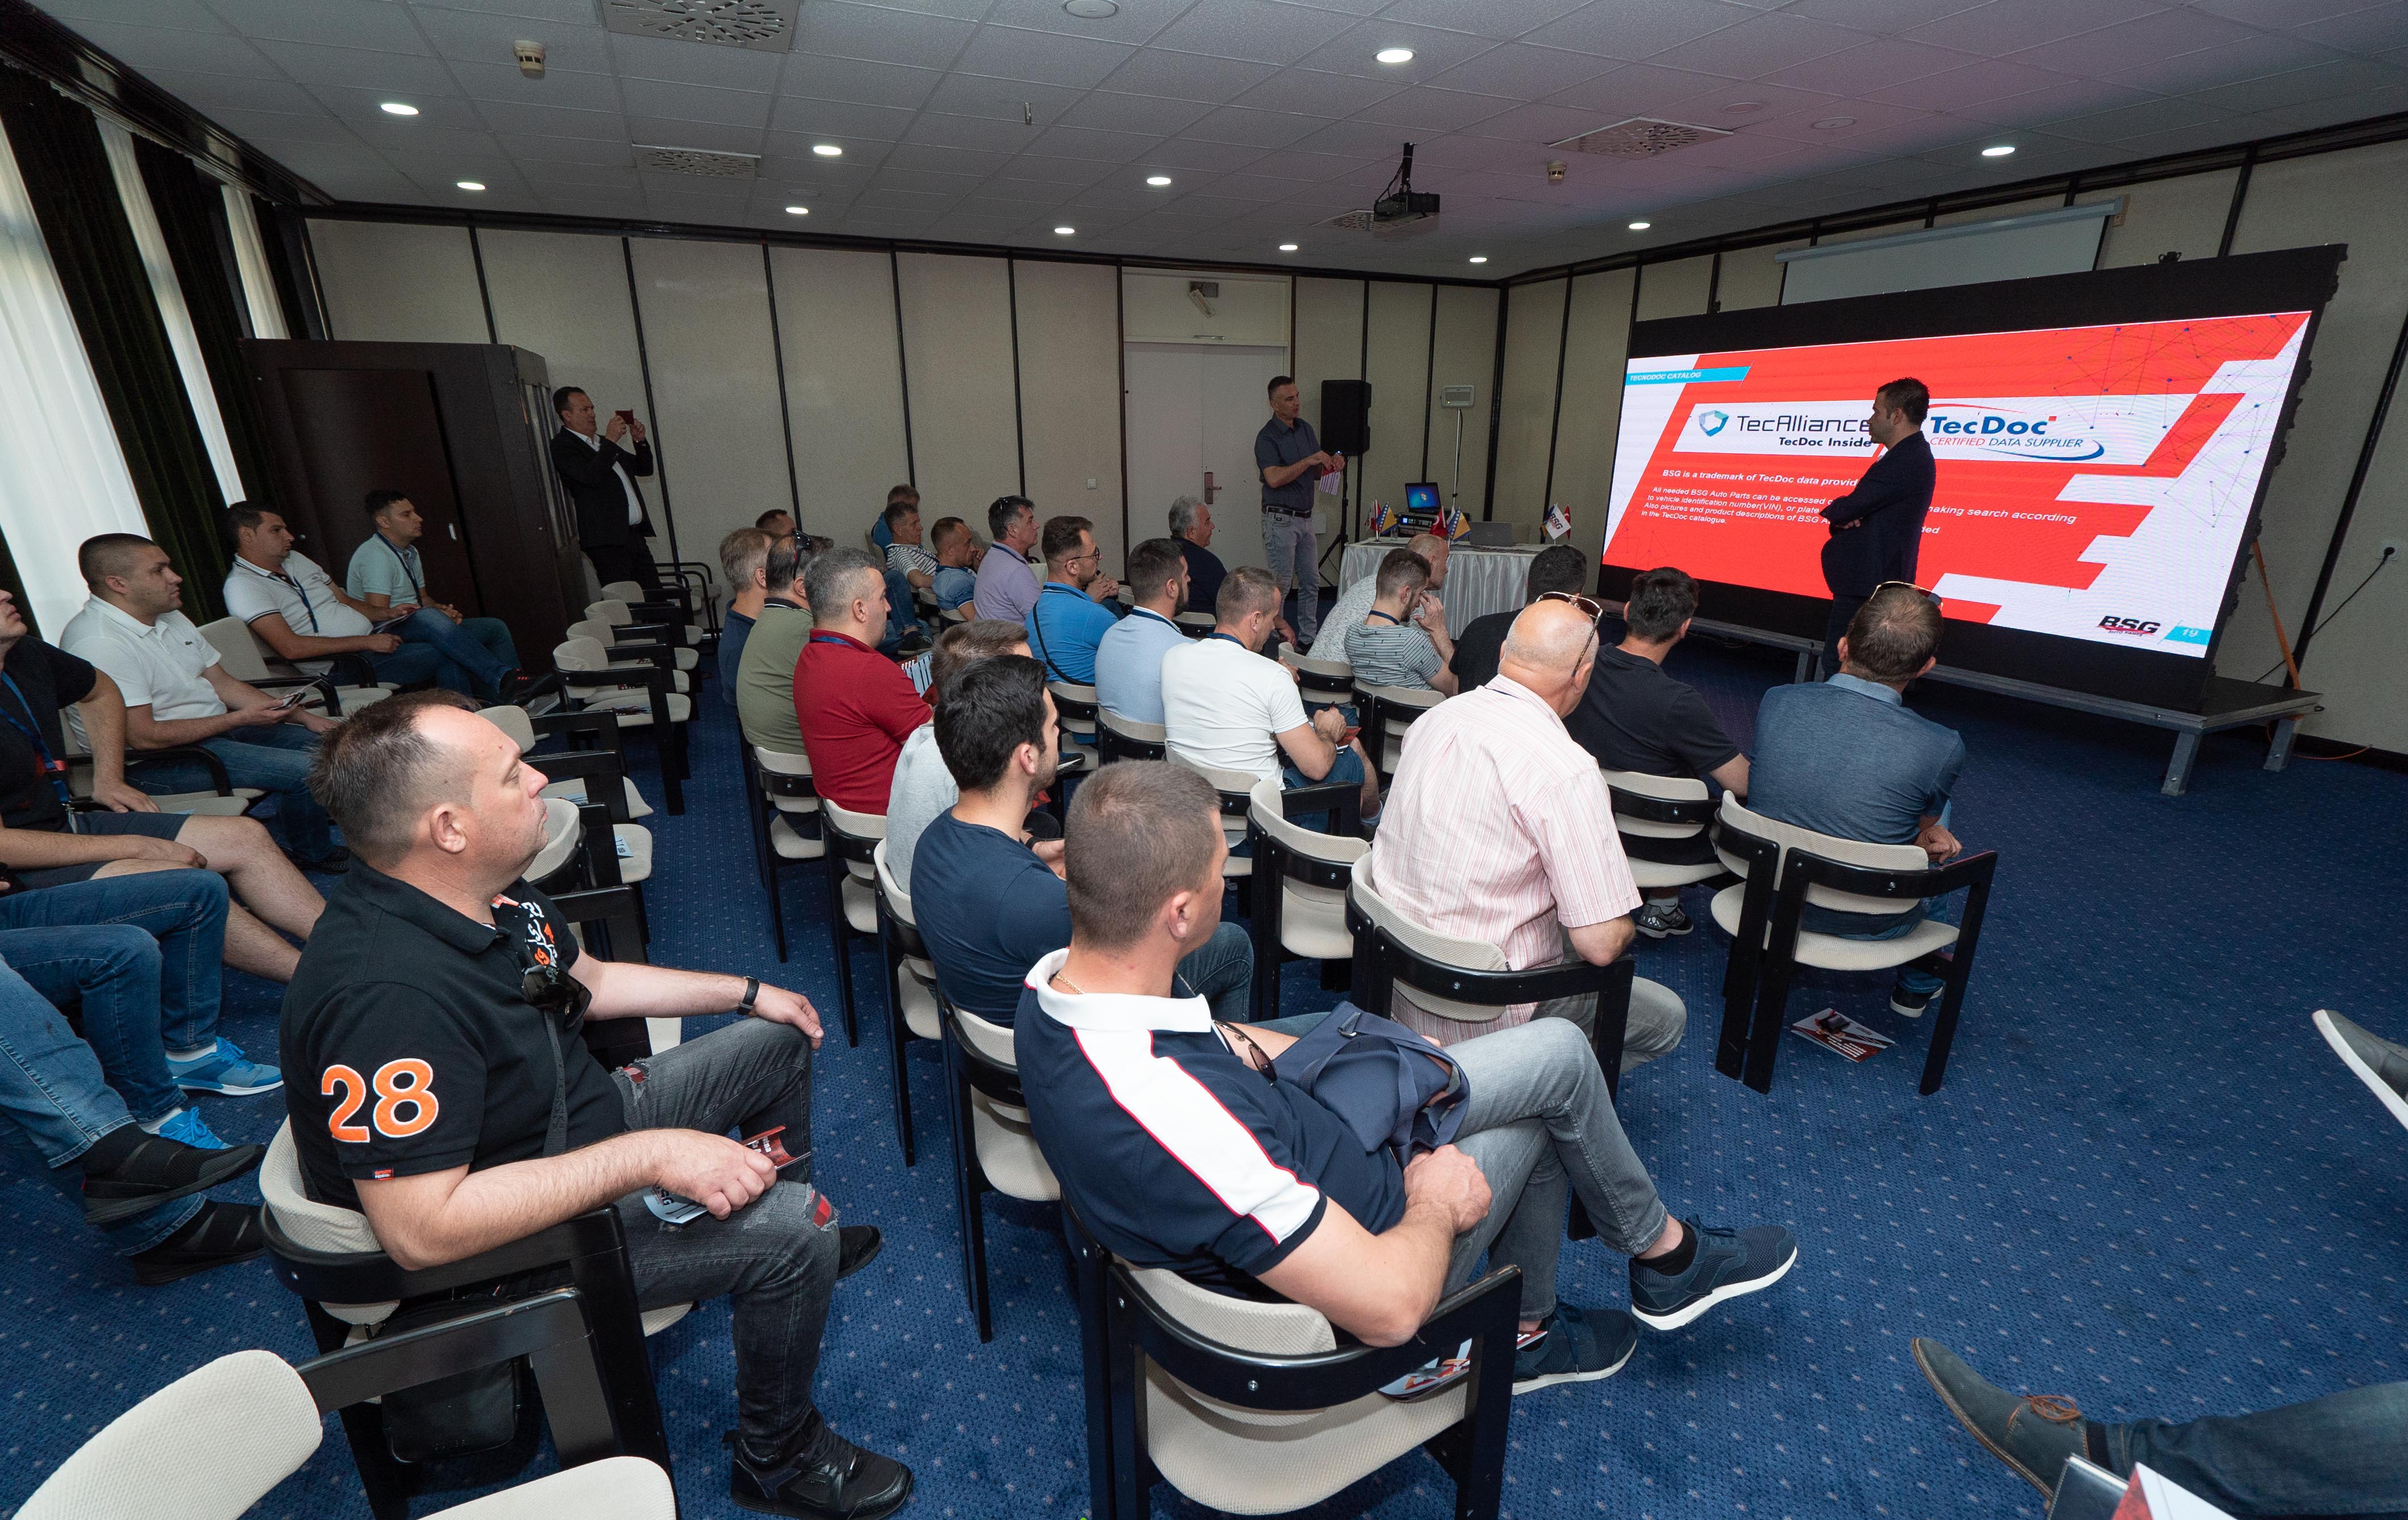 <p>BSG Auto Parts, which serves its customers with high quality product policy in more than 63 countries, has completed the trainings specially organized for master technicians in Izmir, Uşak and Sarajevo.</p>

<p>The training also provided detailed information about the company’s investments, product range, consumer rights and the correct use of the products.</p>

<p>After the training, BSG brand representatives and technicians have dined together and had pleasant conversations along with souvenir photos.</p>